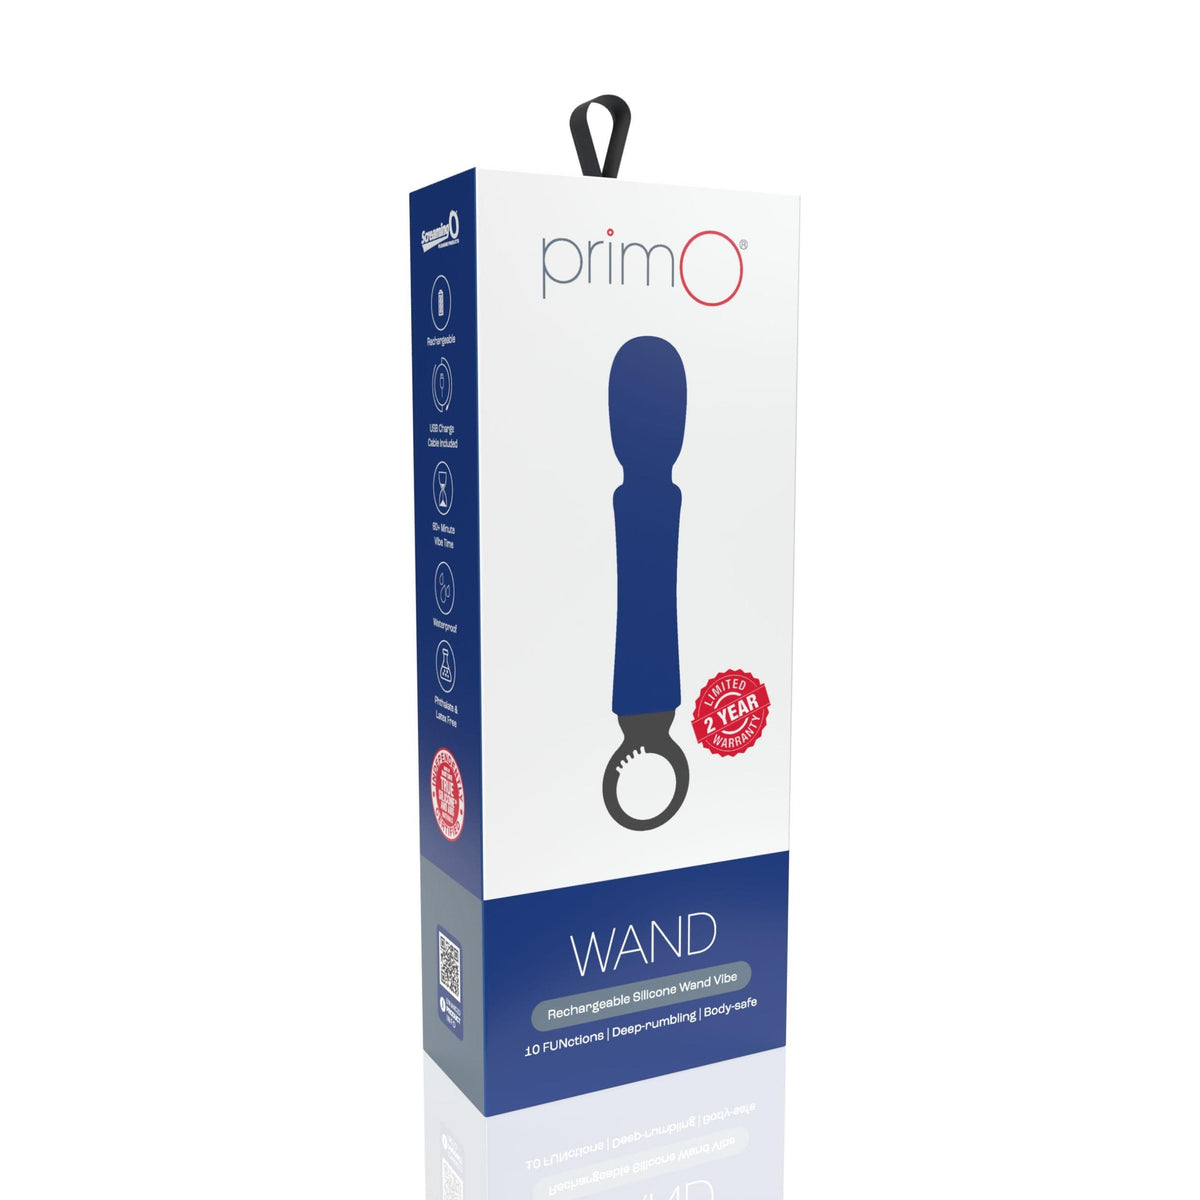 primo wand rechargeable vibe blueberry